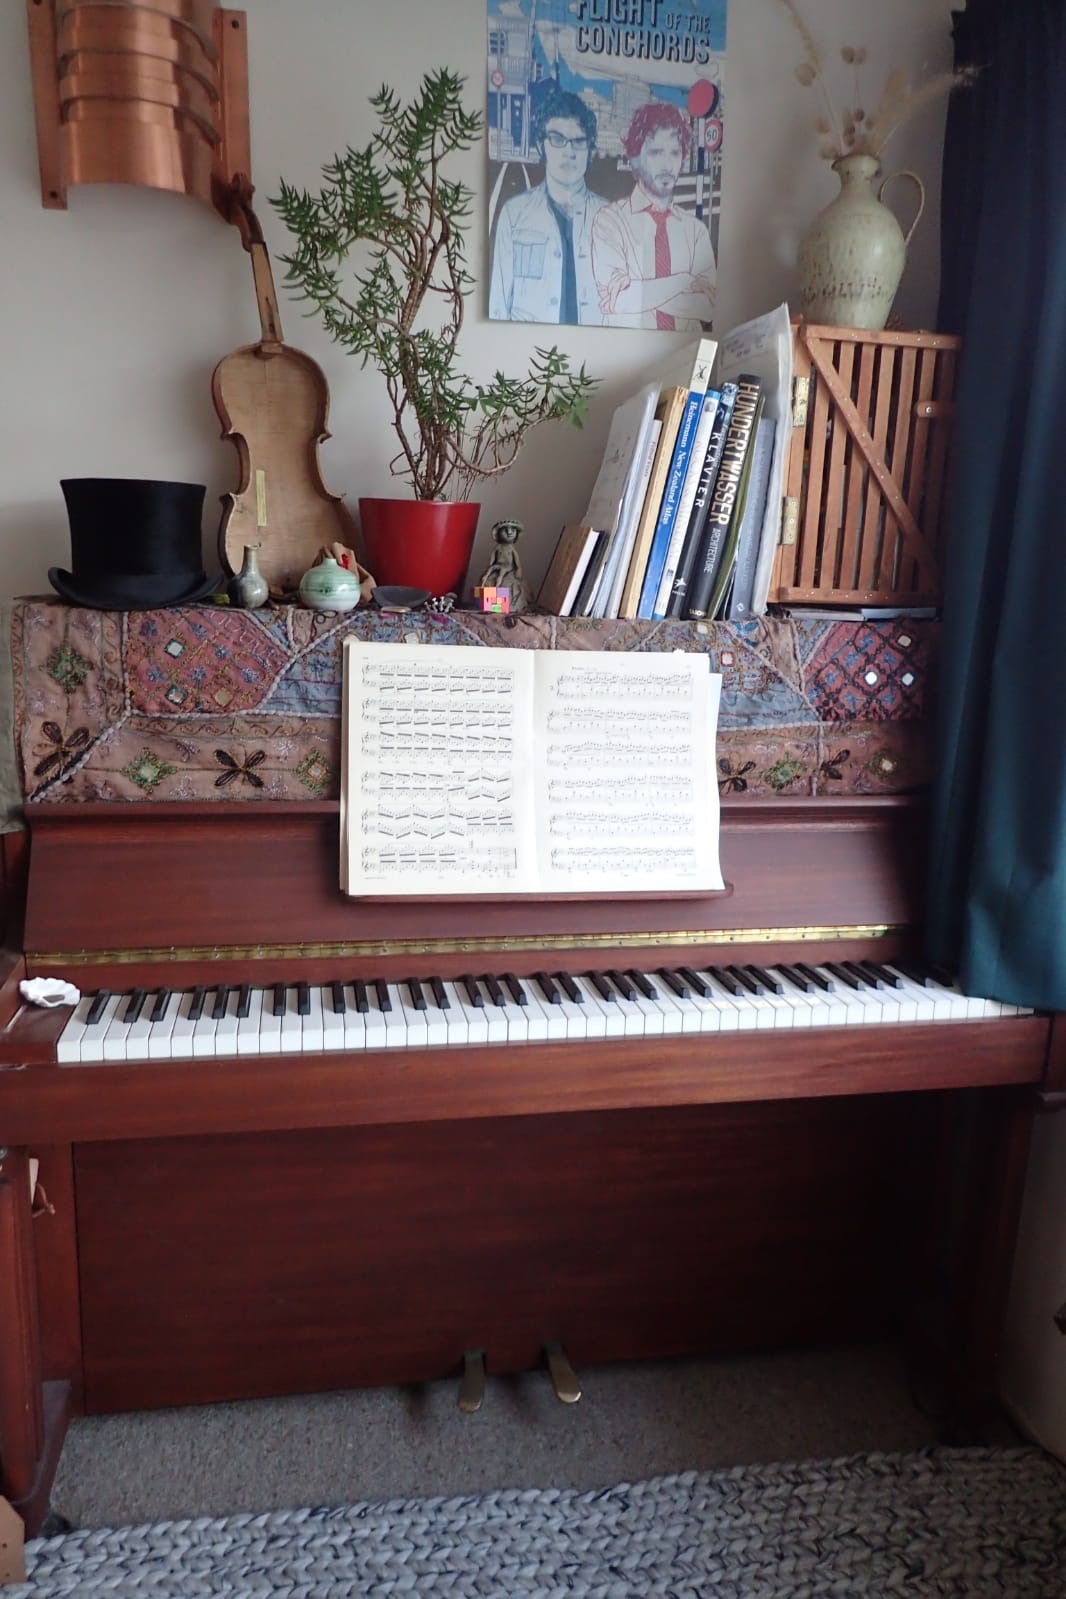 A piano with a music book and other objects on top